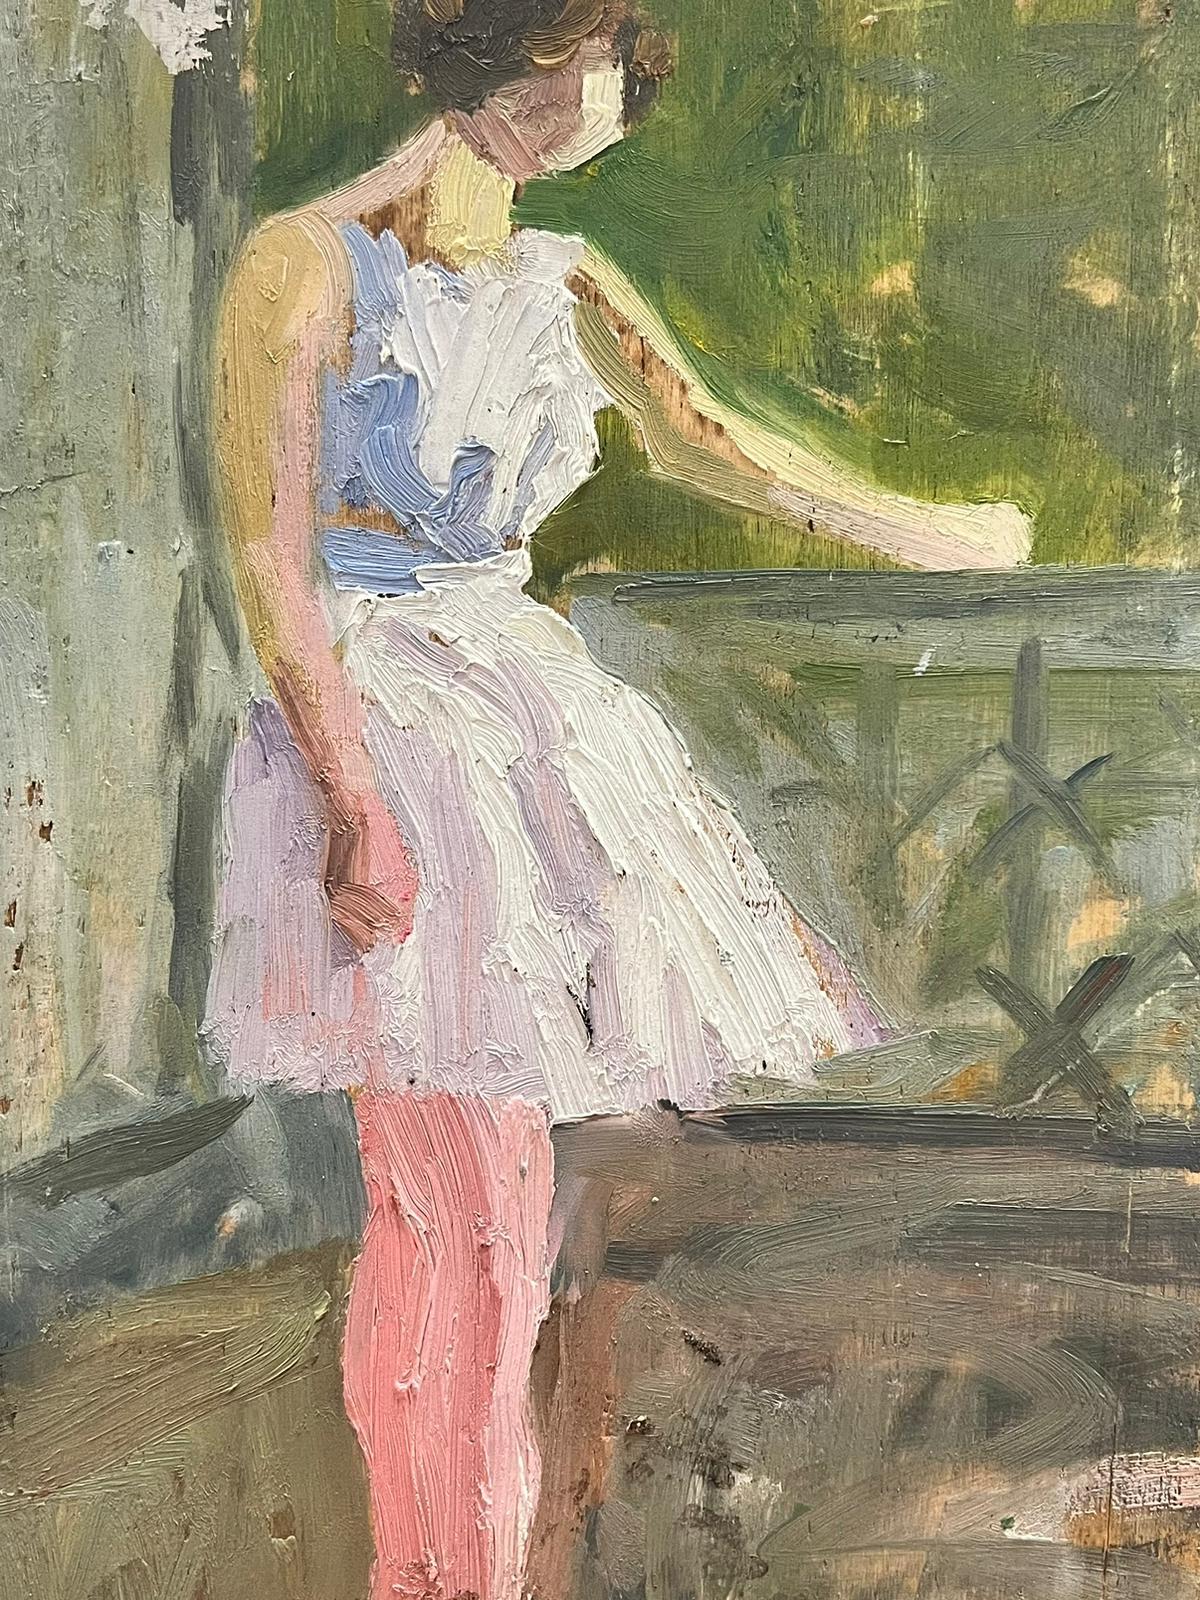 Artist/ School: Suzanne Crochet (French c. 1930), French Impressionist artist

Title: the Ballerina

Medium: oil on board, unframed and double sided work

board: 13 x 9.5 inches

Provenance: private collection, France

Condition: The painting is in